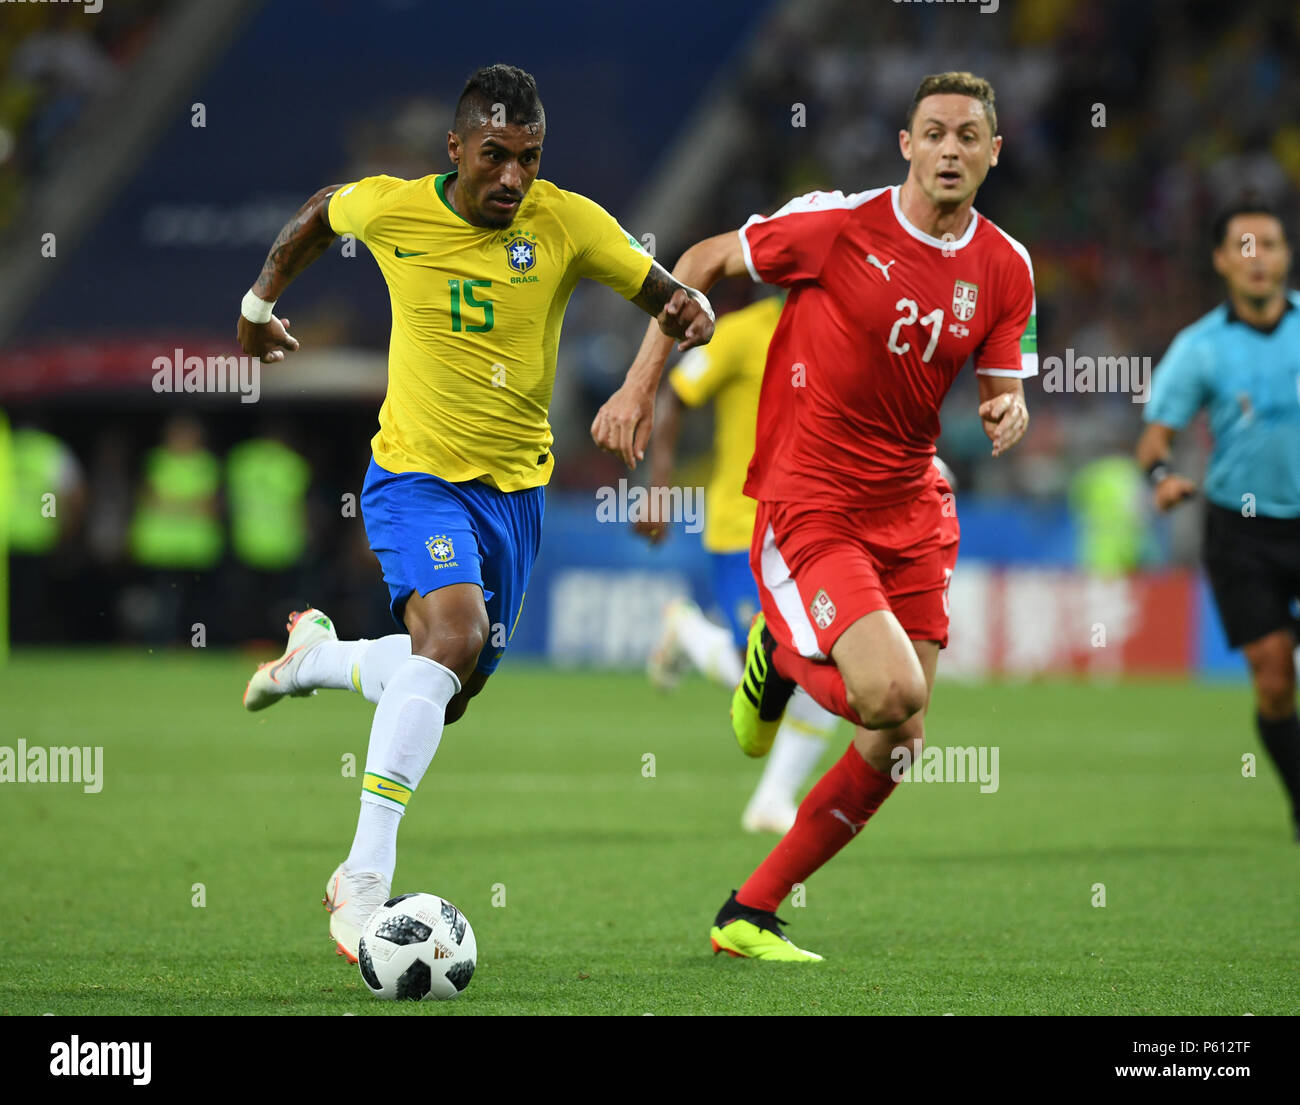 Moscow, Russia. 27th June, 2018. Paulinho (L) of Brazil vies with Nemanja Matic of Serbia during the 2018 FIFA World Cup Group E match between Brazil and Serbia in Moscow, Russia, June 27, 2018. Credit: Du Yu/Xinhua/Alamy Live News Stock Photo